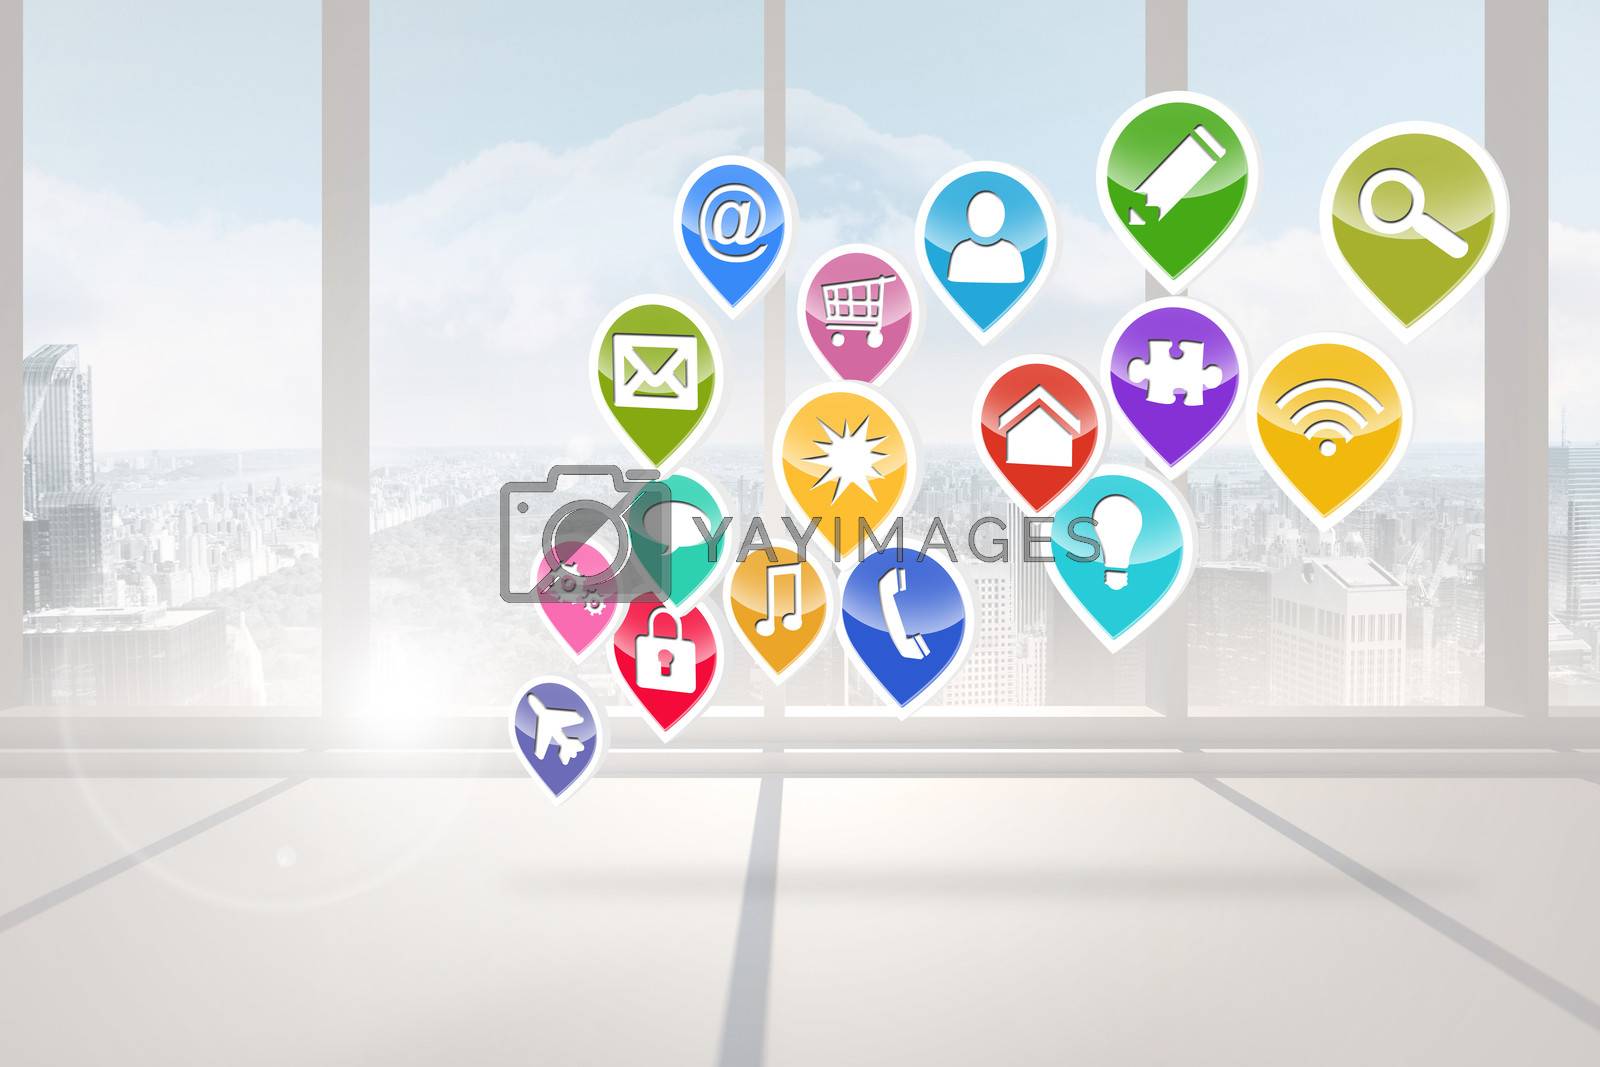 Royalty free image of Computing application icons by Wavebreakmedia